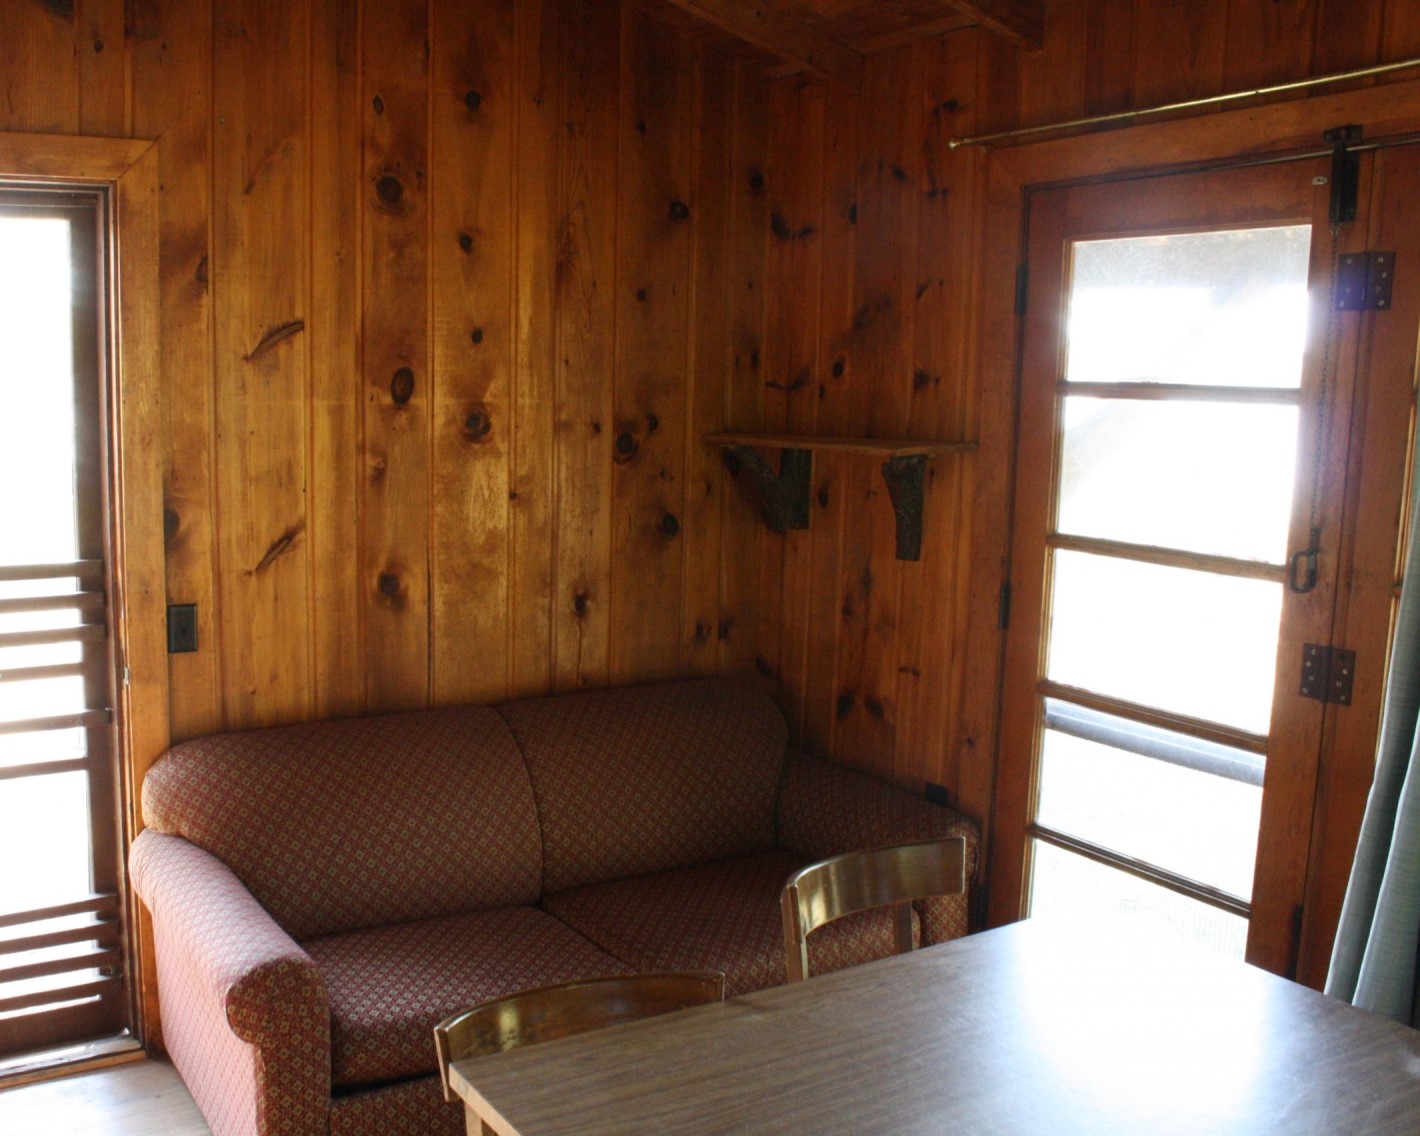 Picture of the cabin living room, showing a couch and small dining table with lots of natural light